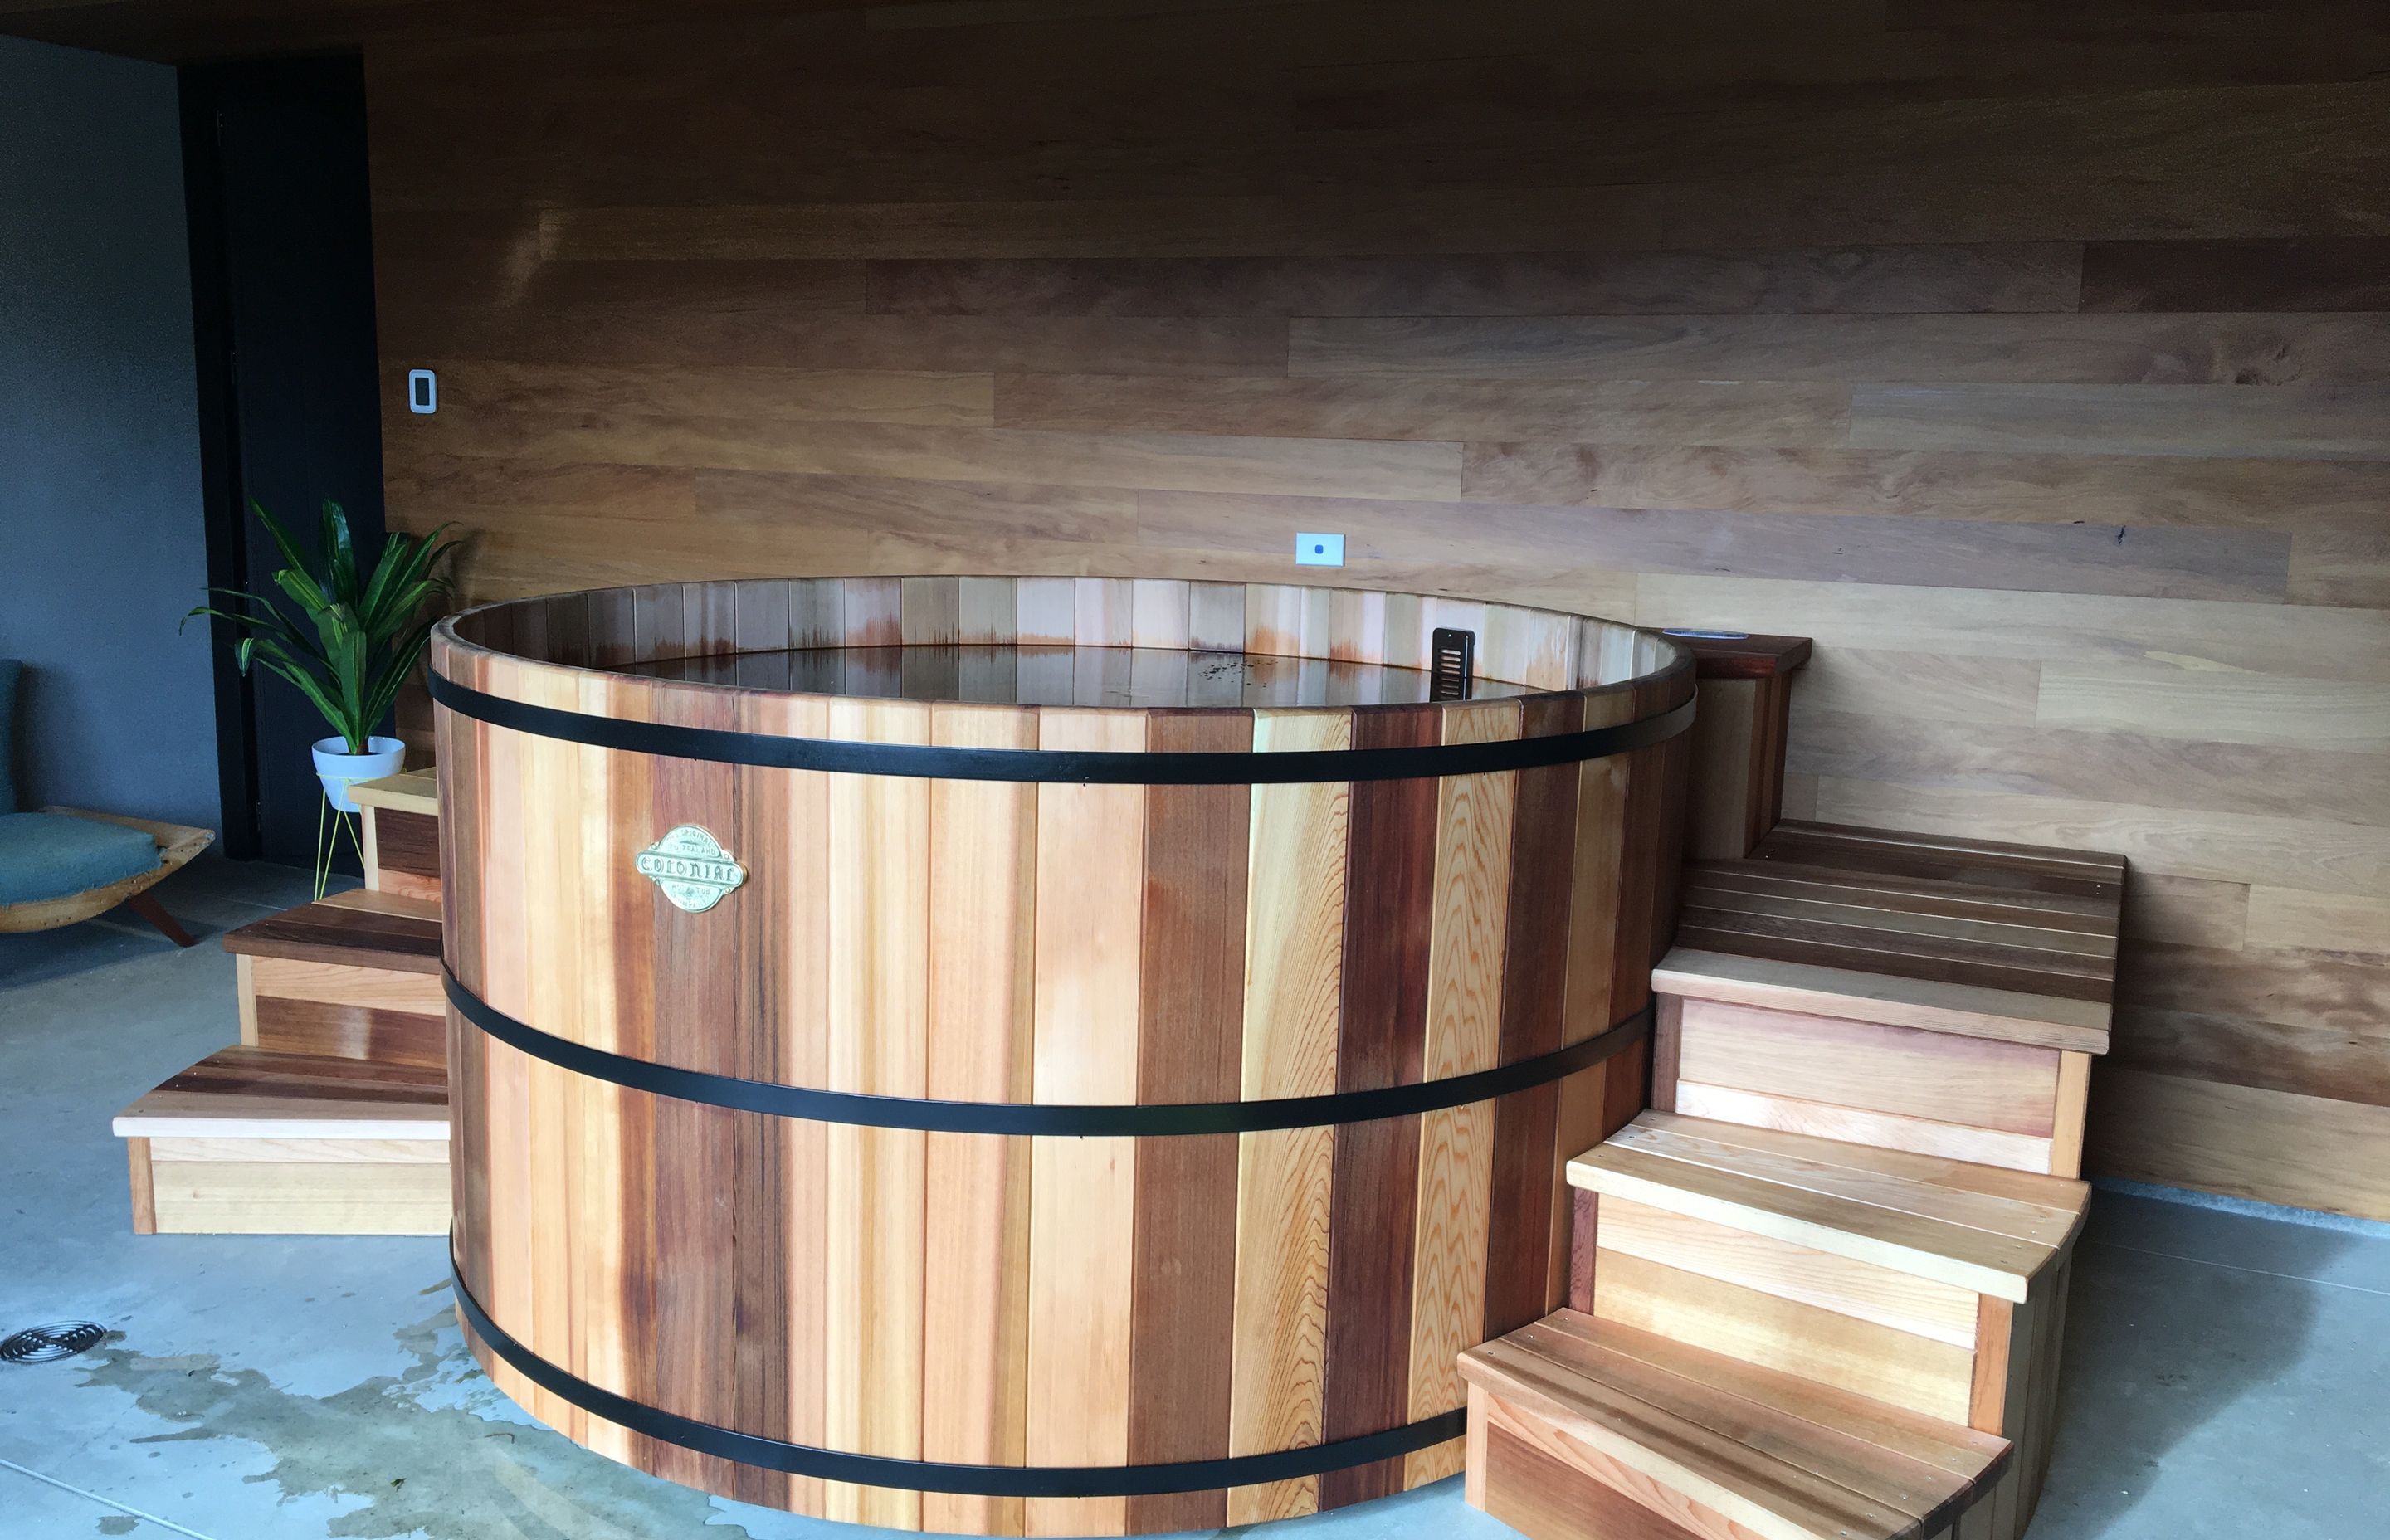 Built with quality Canadian Heart Cedar, the tubs are aesthetically a step above.